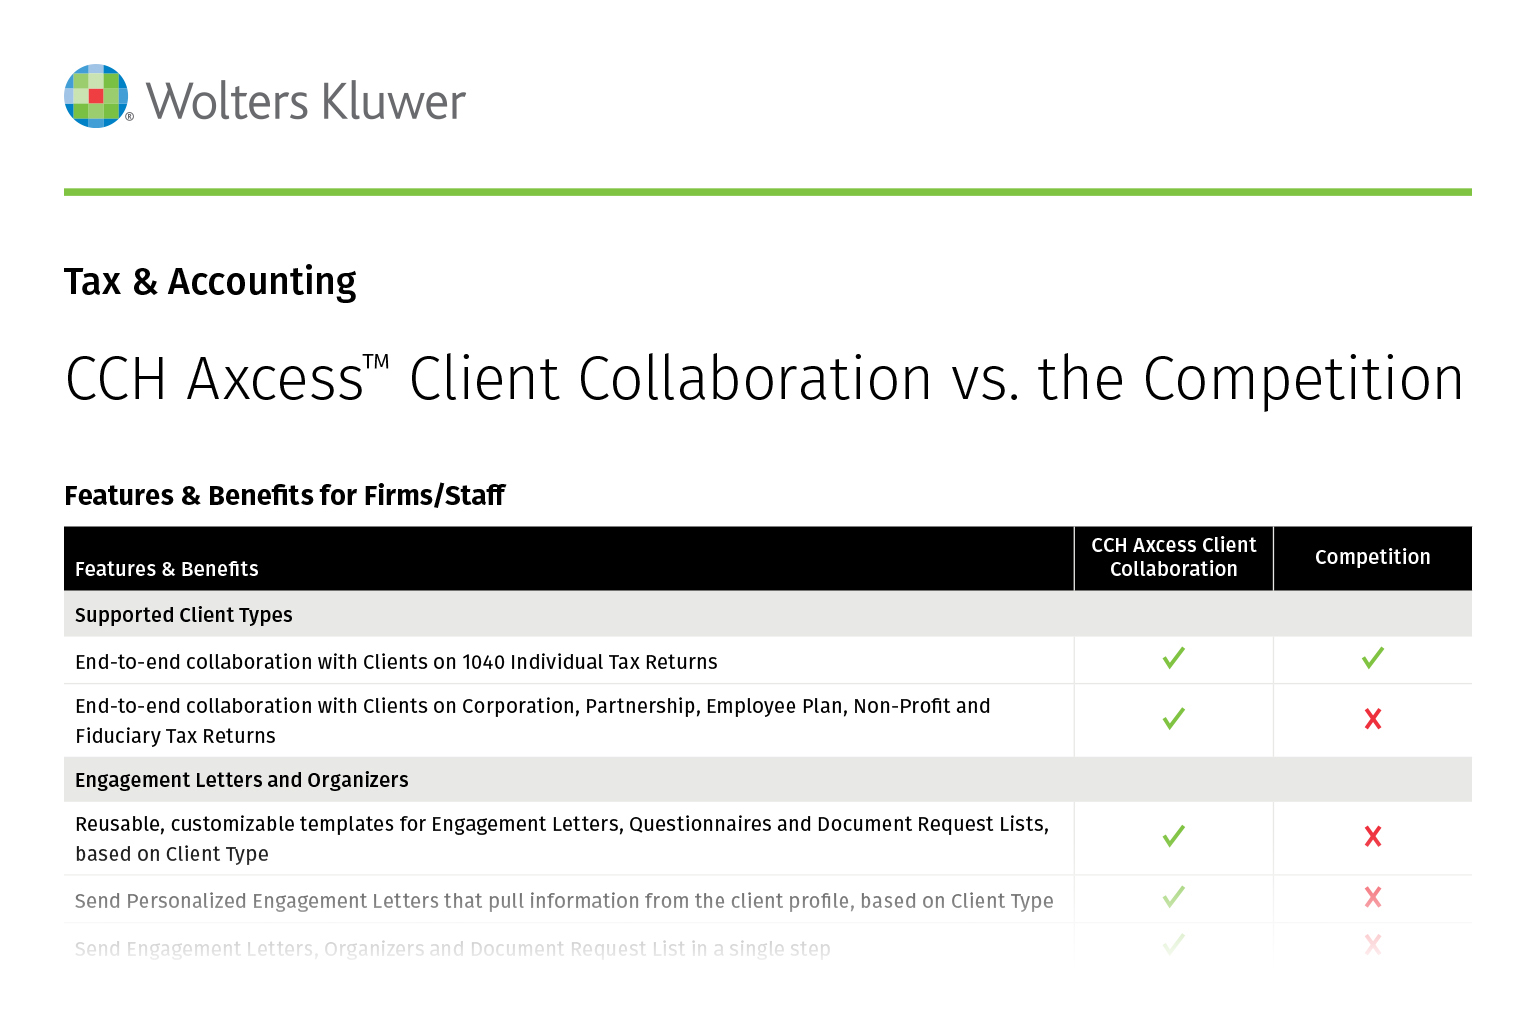 CCH Axcess Client Collaboration vs Competition